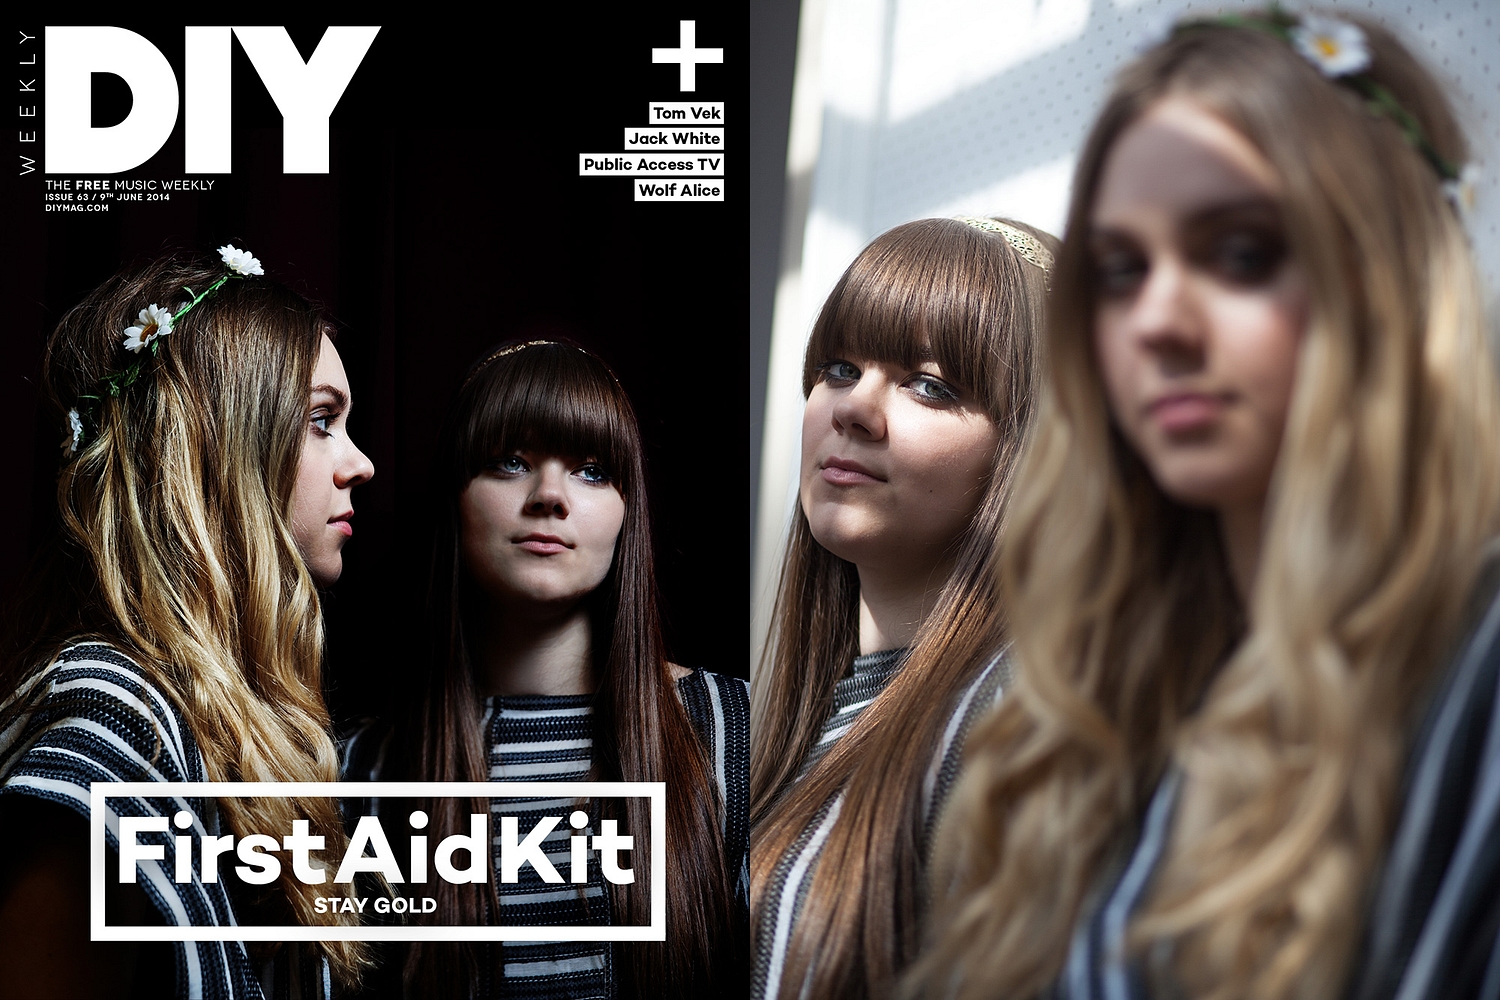 New DIY Weekly out now, feat. First Aid Kit, Tom Vek, Jack White & More